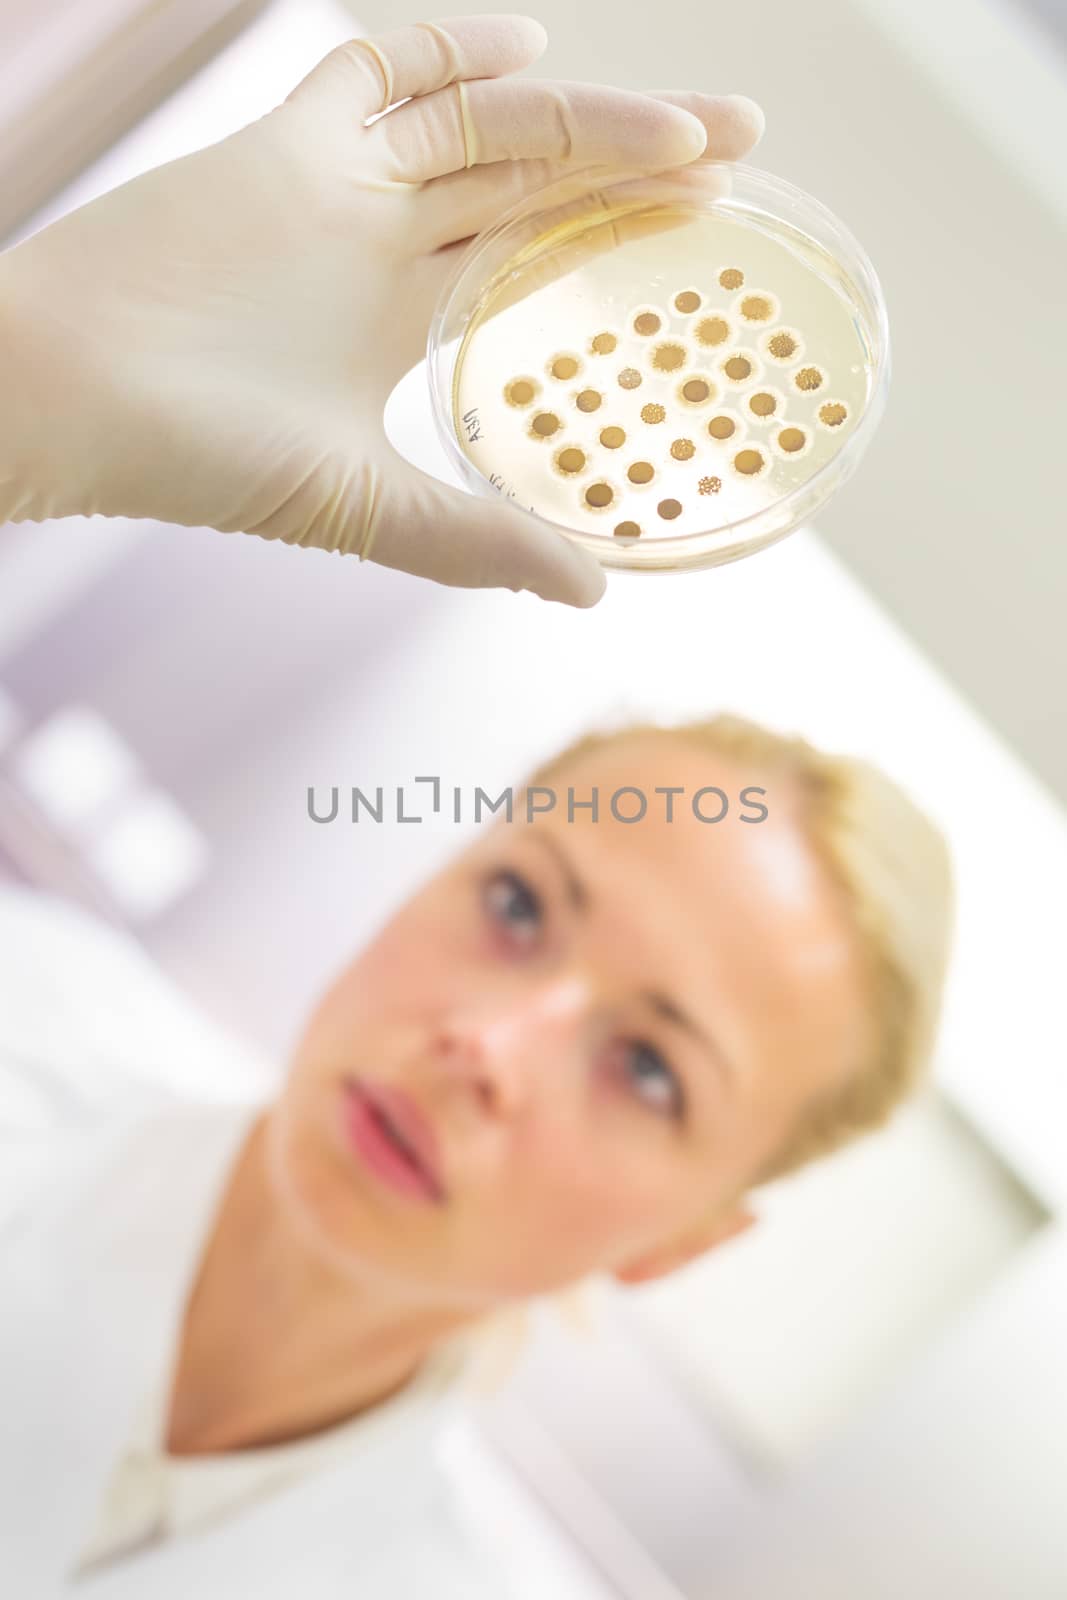 Female life science professional observing cell culture samples on LB agar medium in petri dish.  Scientist grafting bacteria in microbiological analytical laboratory .  Focus on scientist's eye.